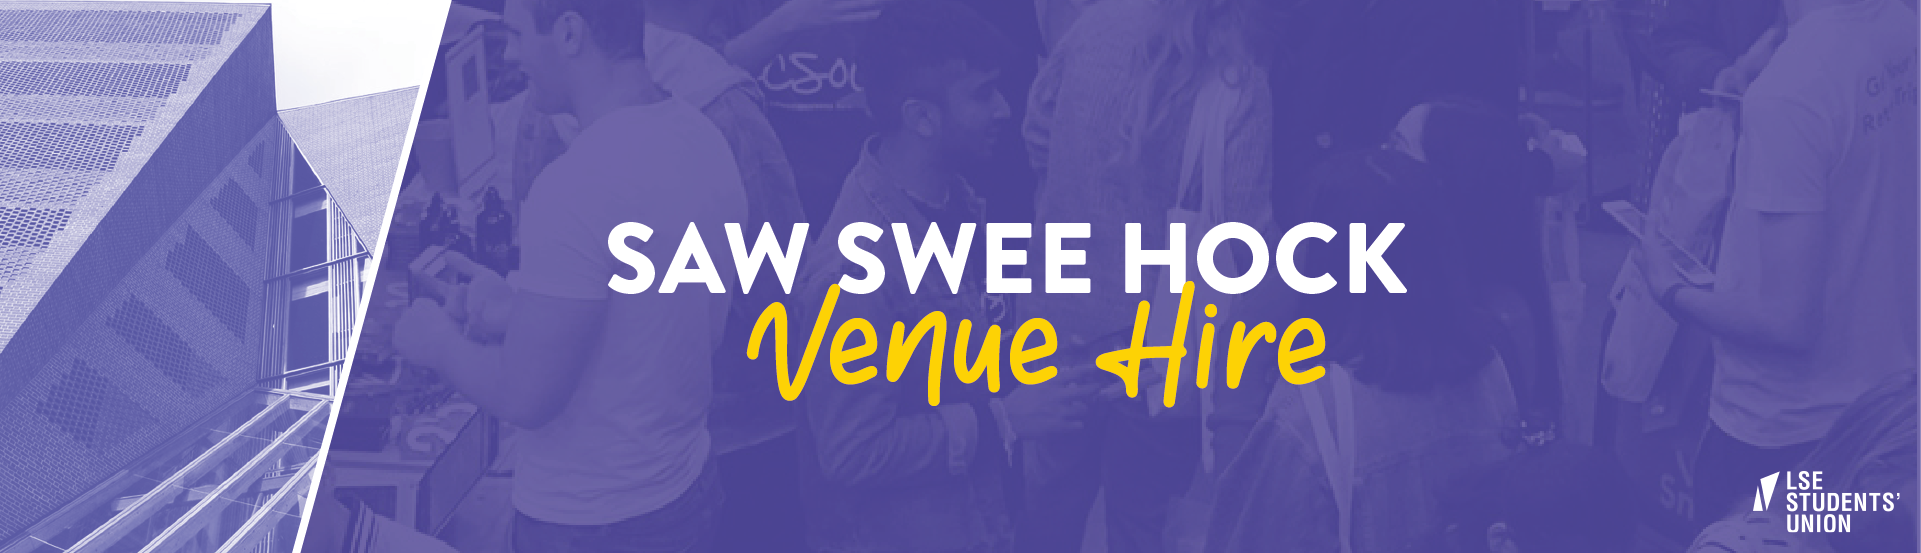 Venue Hire at Saw Swee Hock